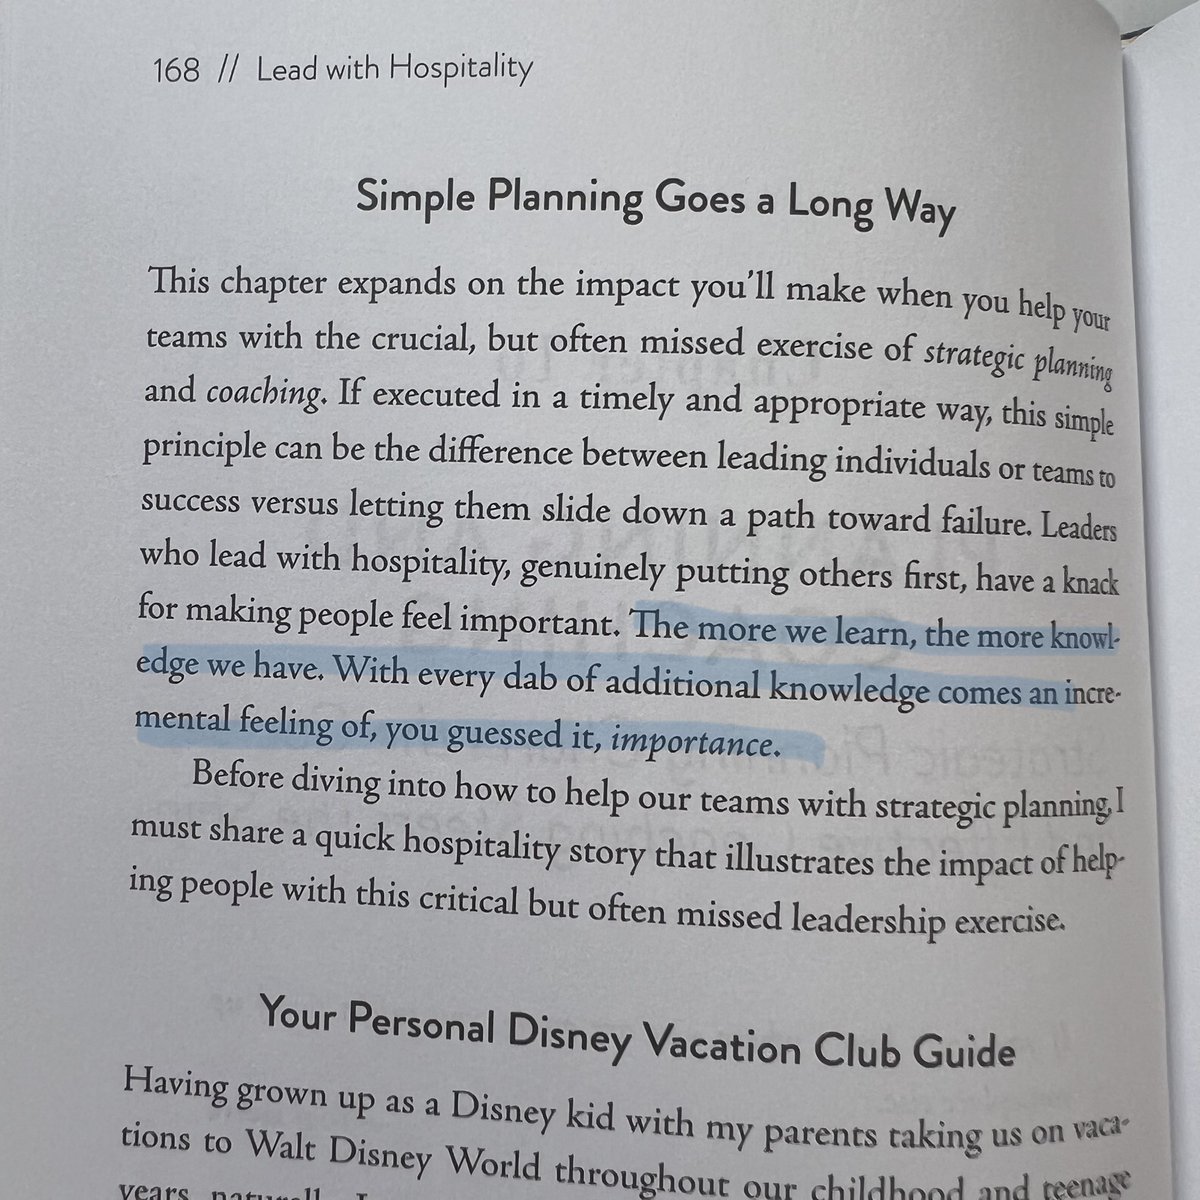 Are you a lifelong learner?

📷 'Lead with Hospitality' page 175

Get your copy of 'Lead with Hospitality' at your favorite bookstore! 

#LeadWithIntegrity #HRStrategies #HospitalityExperts #TeamBuilding #LeadWithPositivity